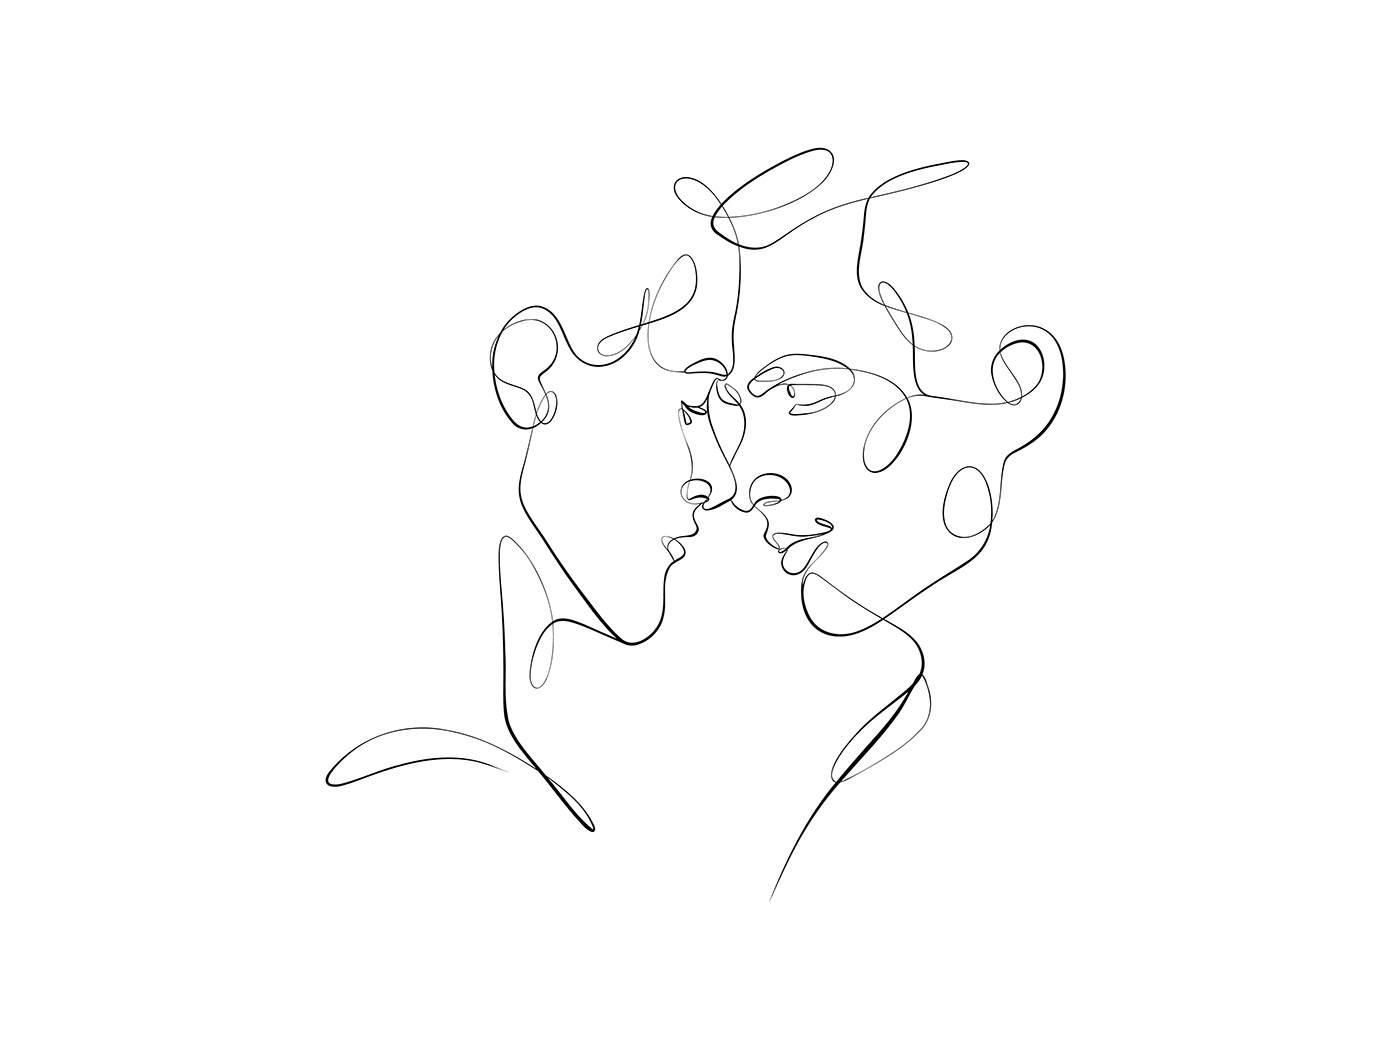 continuous line face line art line art lineart linedrawing minimalist minimalistic One Line Art simple vector